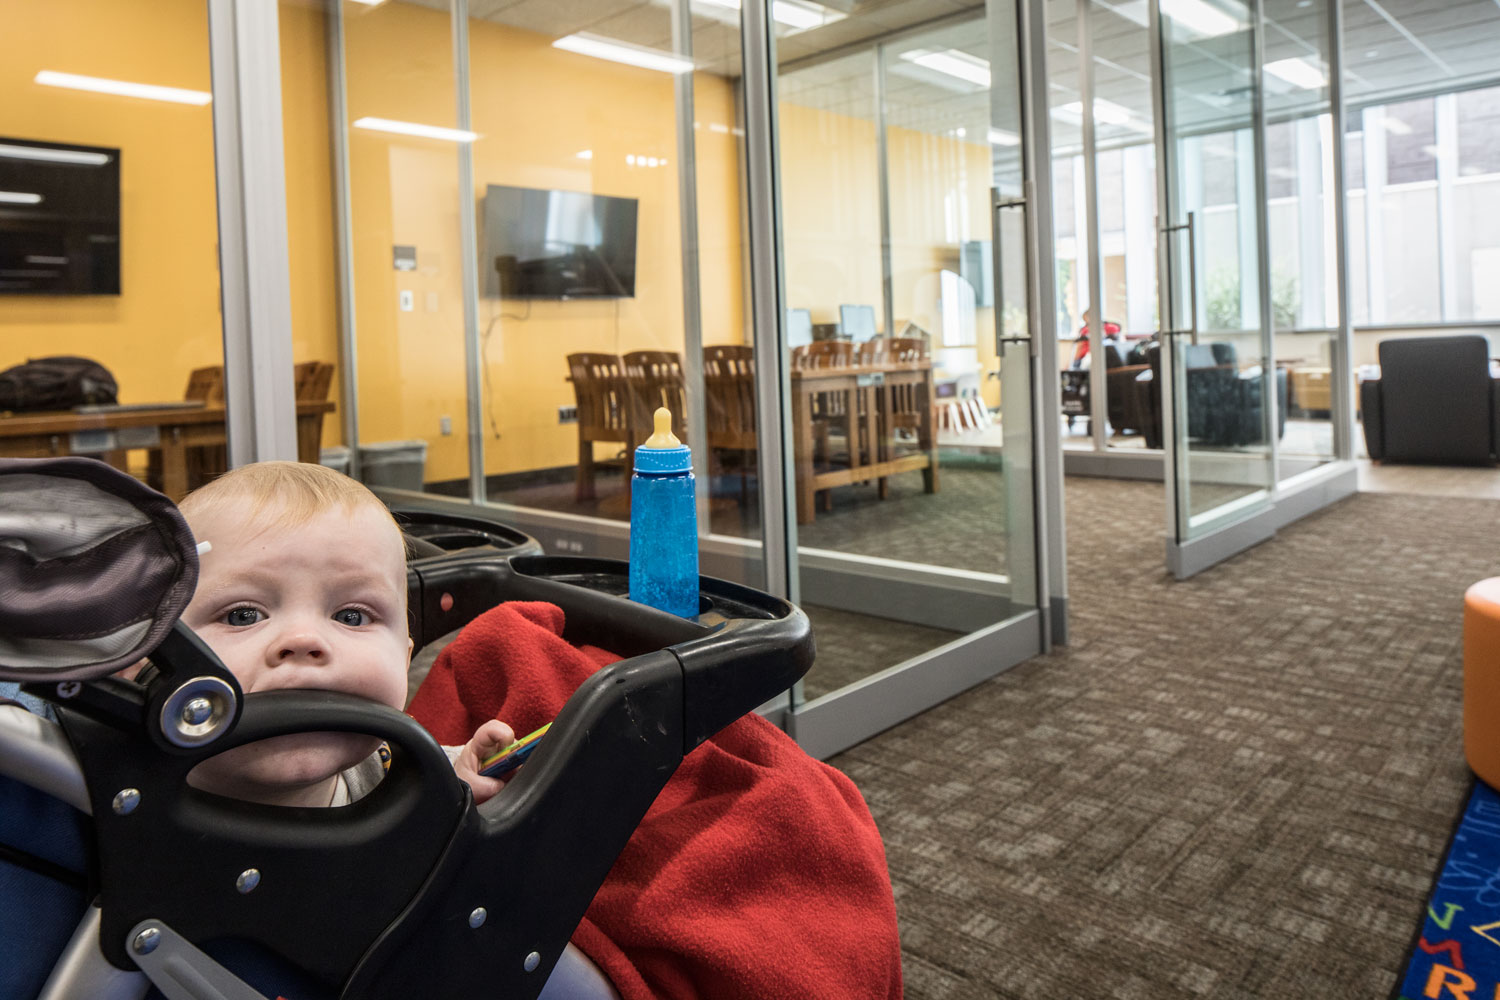 A baby teethes on the handle of its stroller n the new family study room